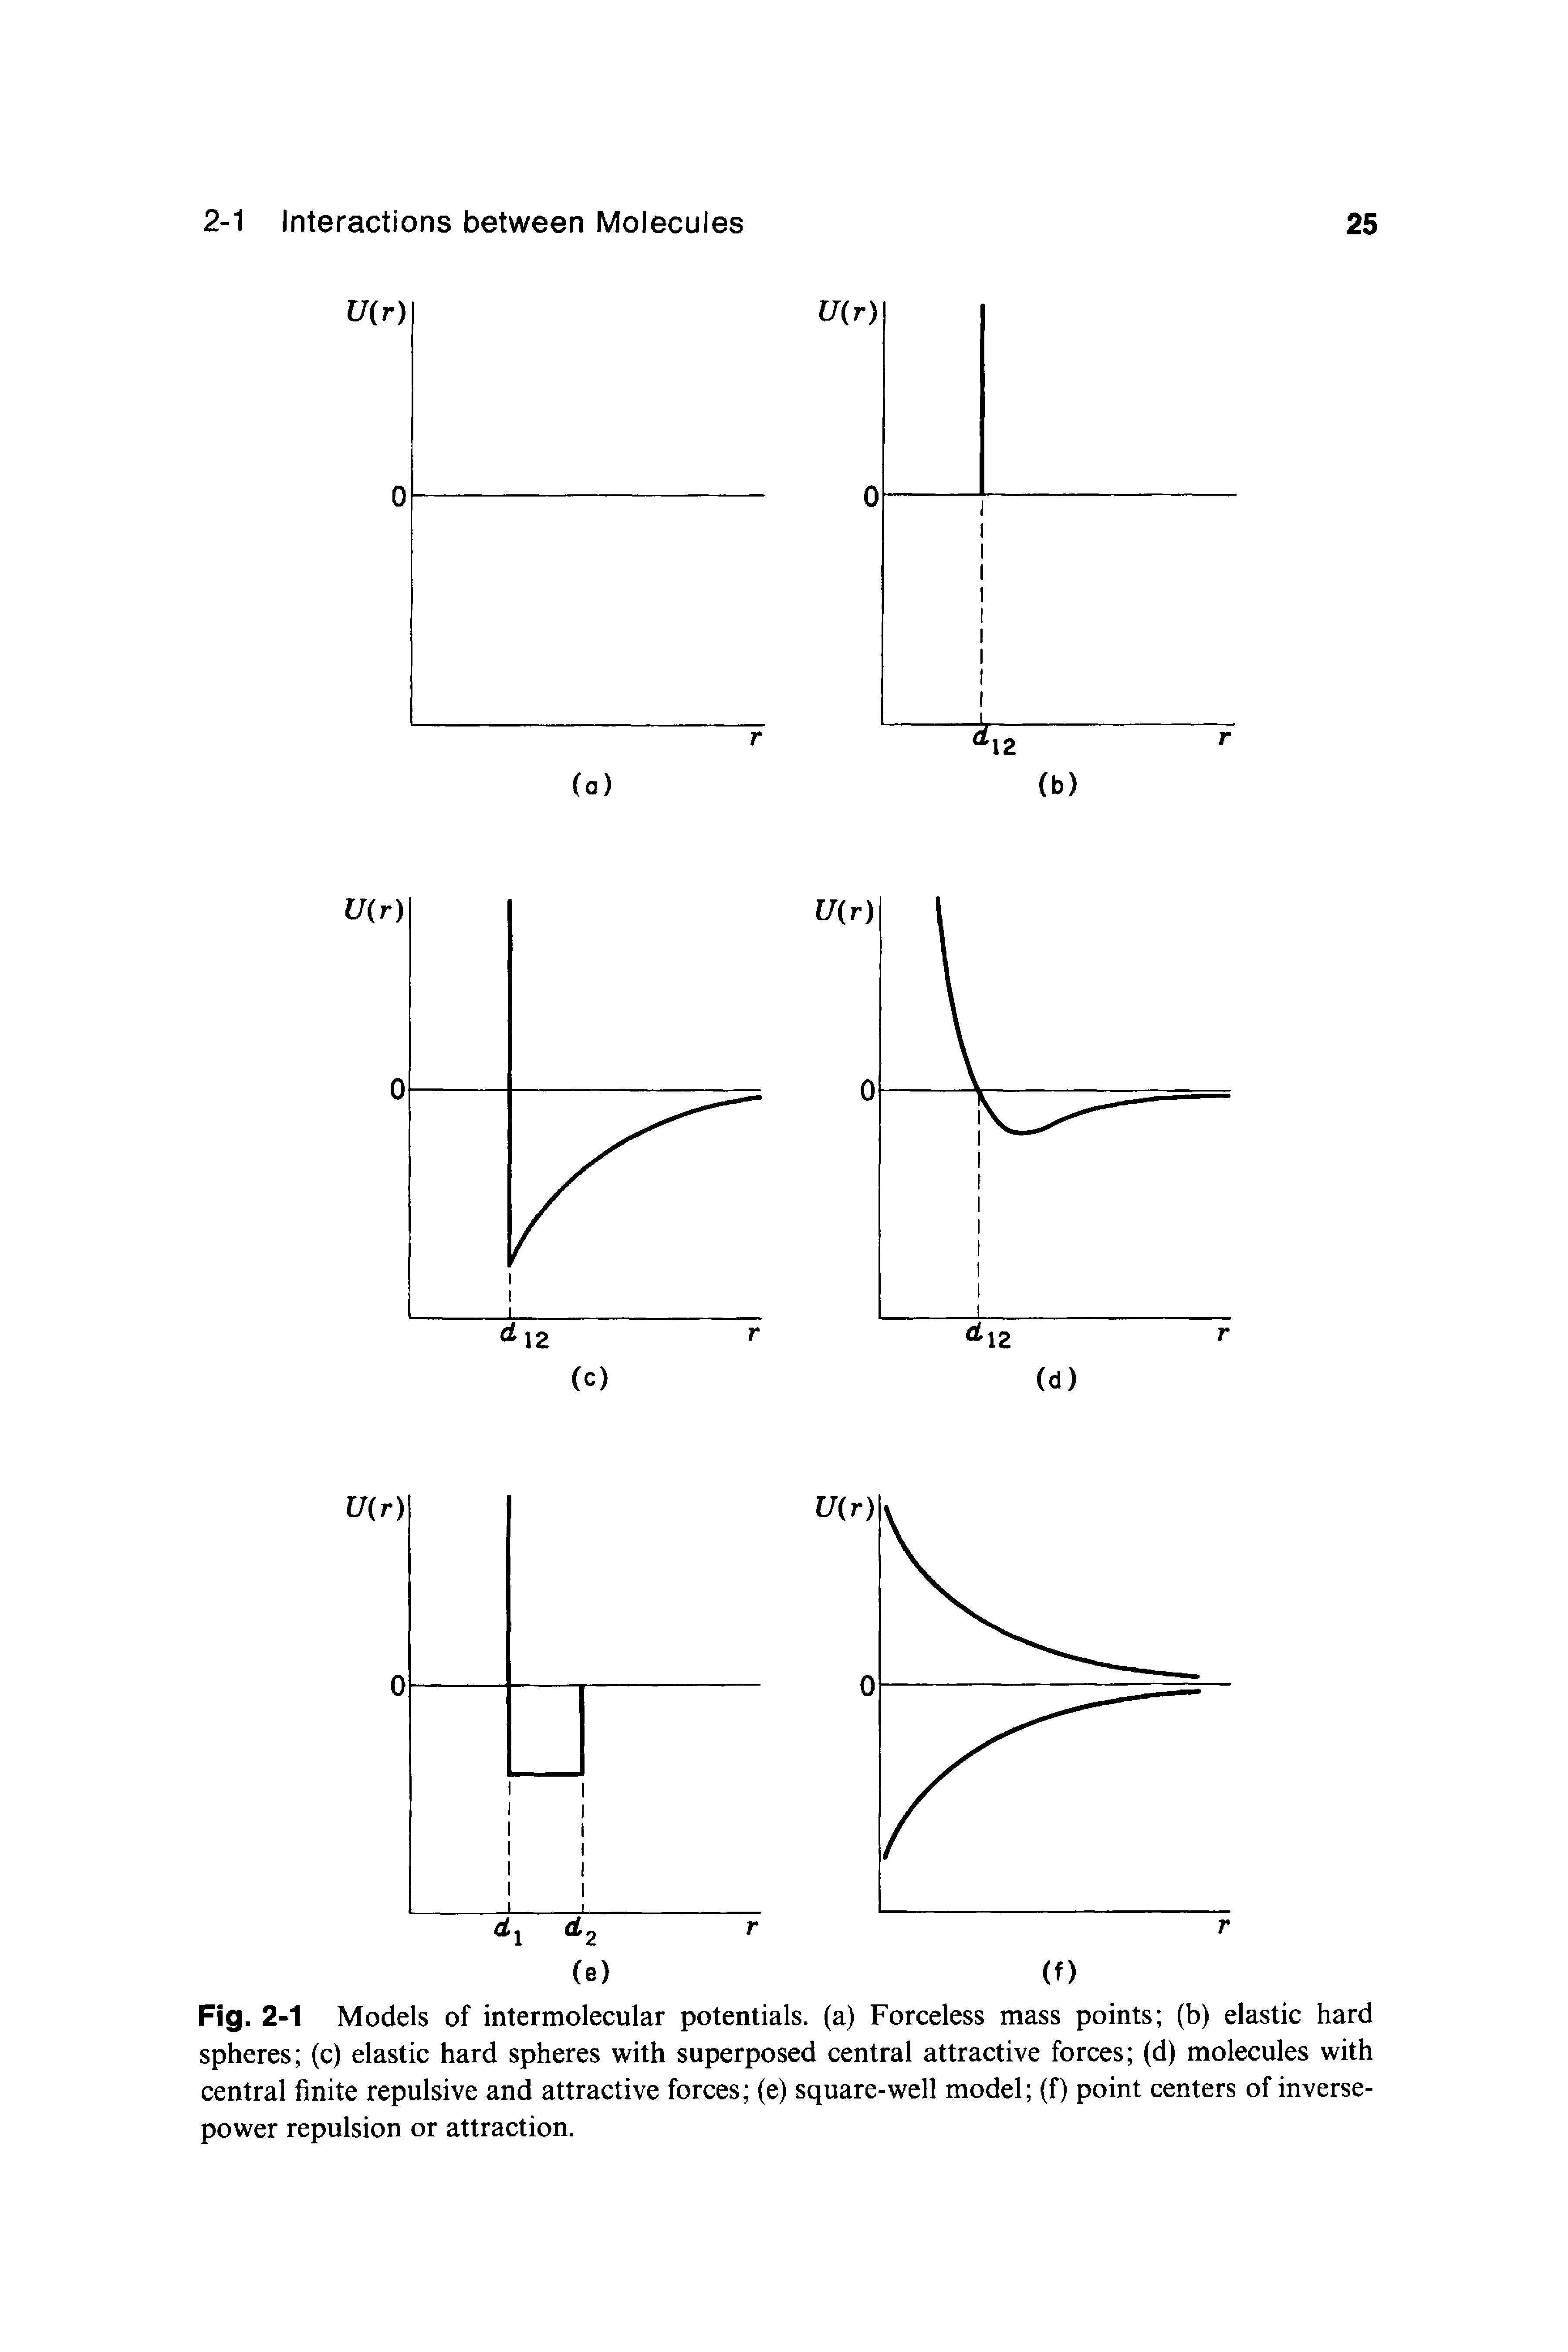 Fig. 2-1 Models of intermolecular potentials, (a) Forceless mass points (b) elastic hard spheres (c) elastic hard spheres with superposed central attractive forces (d) molecules with central finite repulsive and attractive forces (e) square-well model (f) point centers of inverse-power repulsion or attraction.